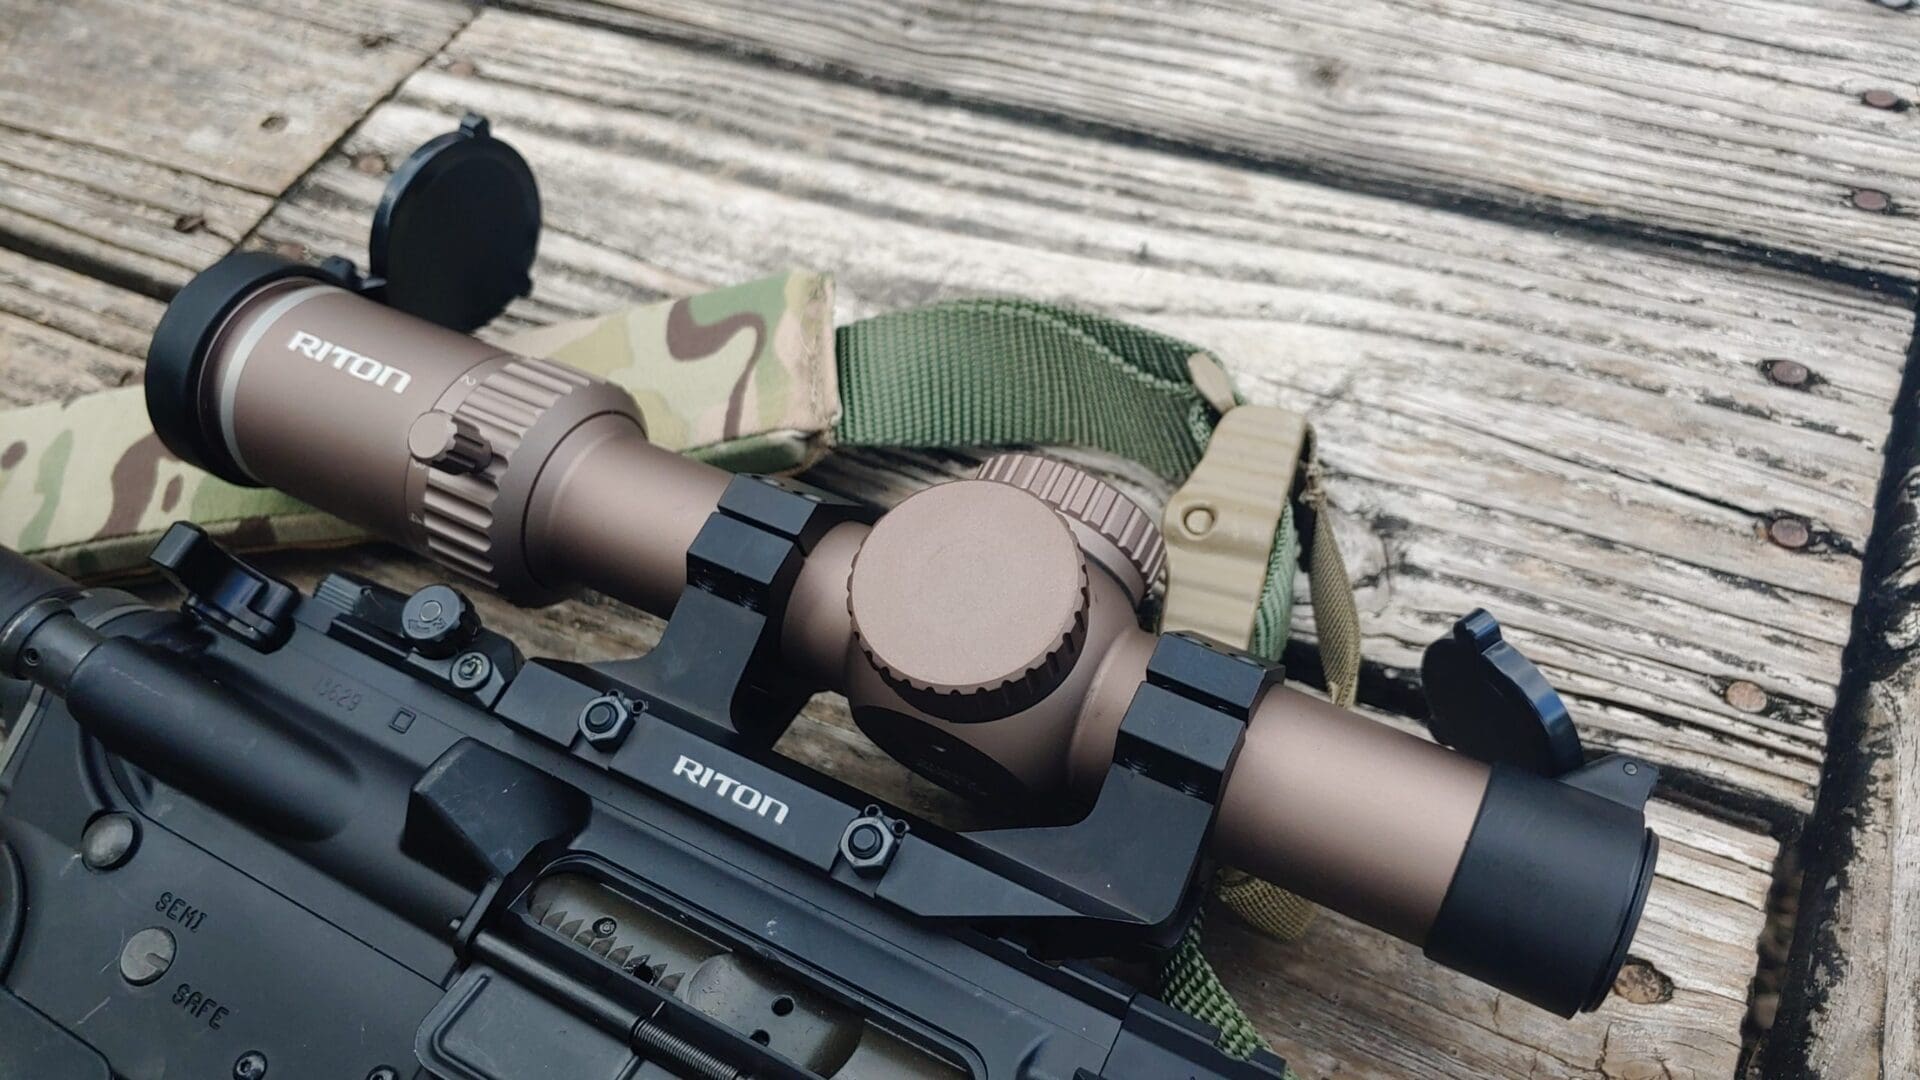 What Is an LPVO and Do You Need One? - The Mag Life